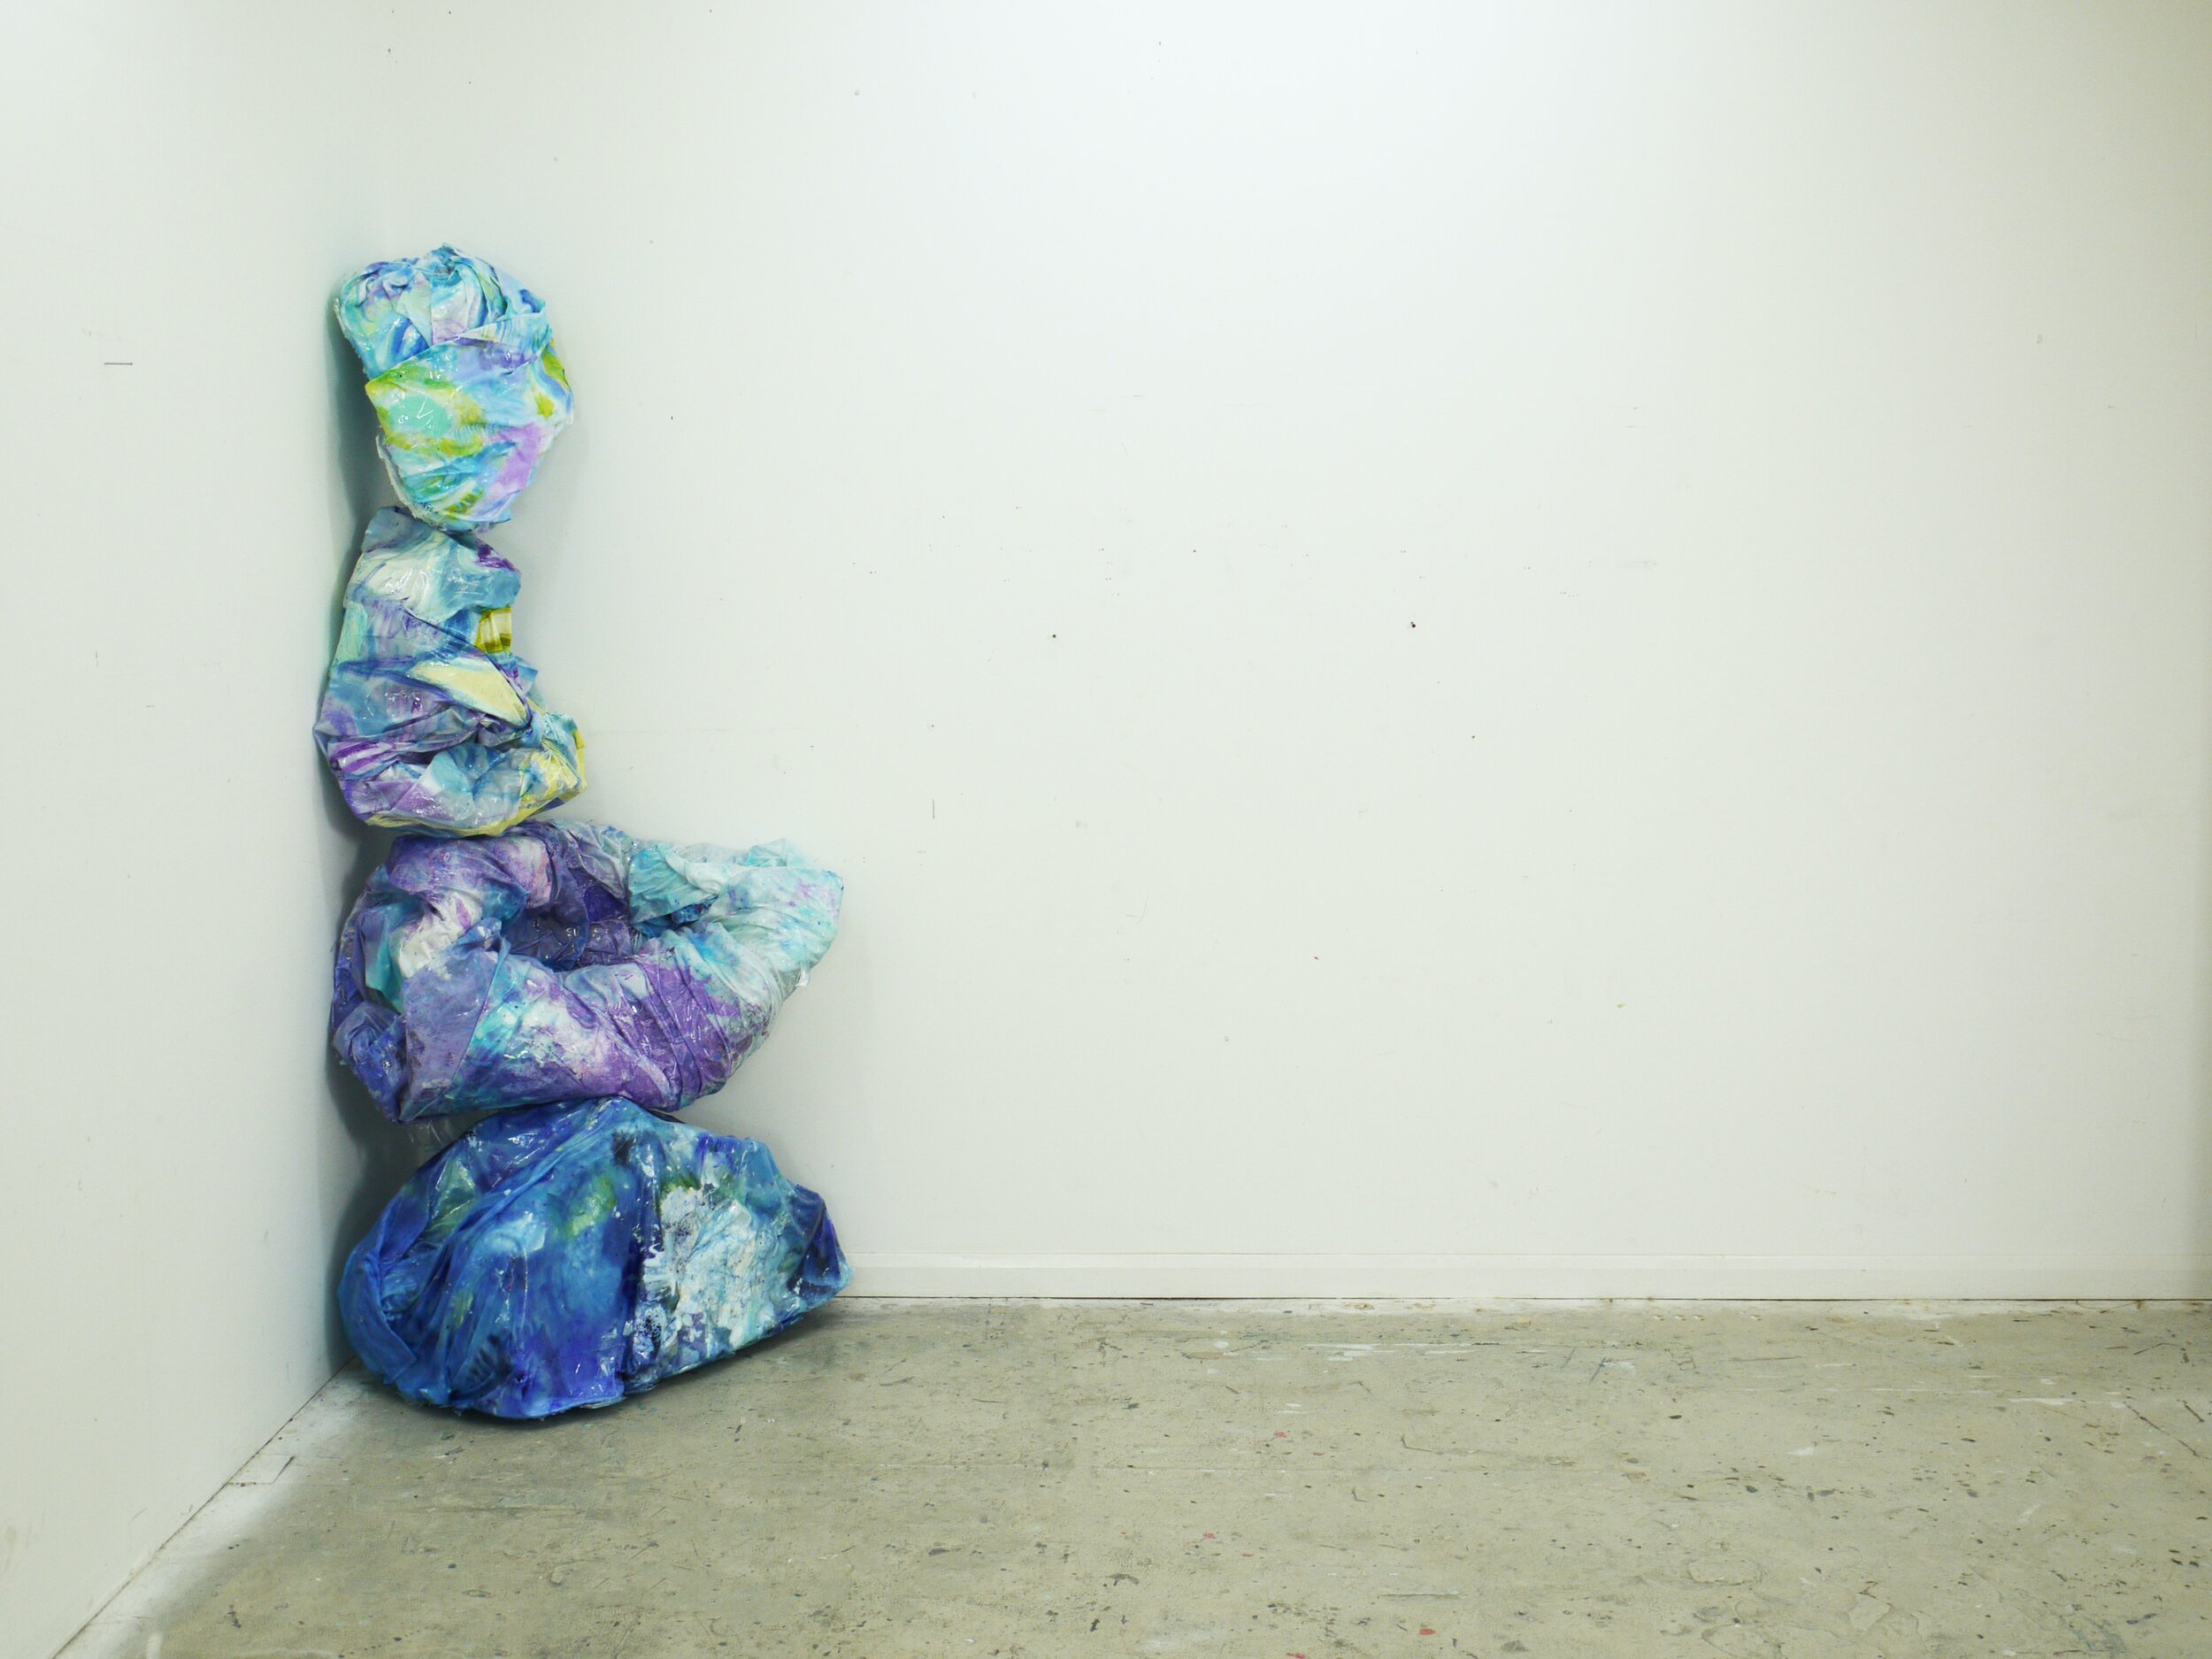    “Colonna”    (May 2021)   Medium: fabric, resin, soap pigment, wire, acrylic    Size:  Standing piece: 150cm W x 400cm H x 80cm D   Floor piece: 100cm W x 55cm H x 45cm D  